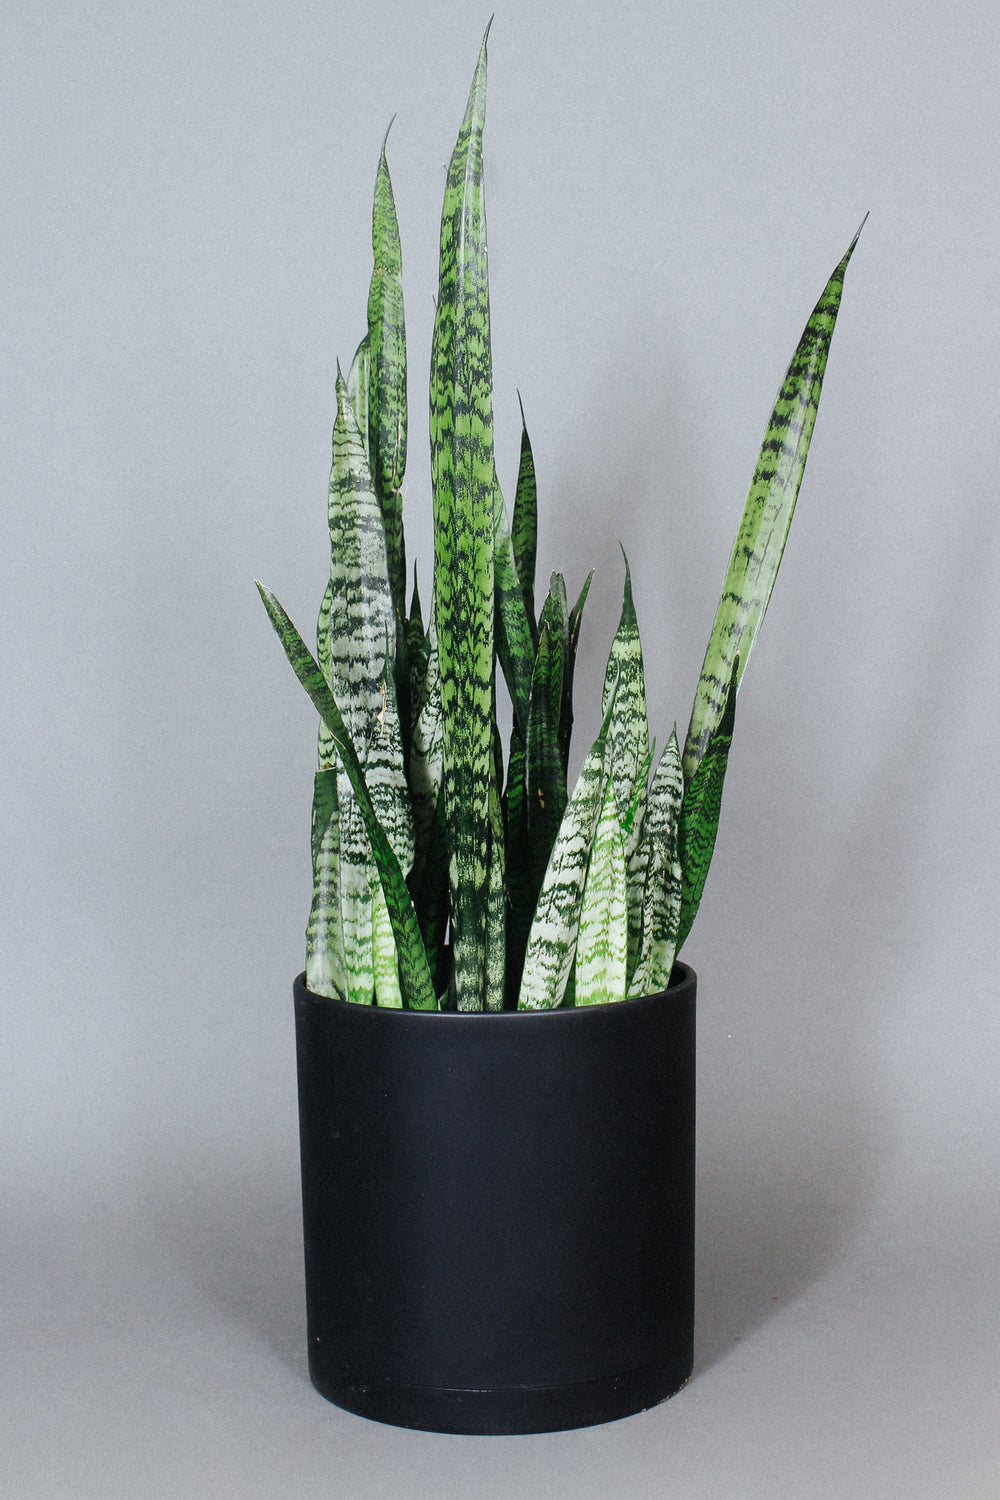 A large Sansevieria Zeylanica (Snake Plant) growing in a 10-inch pot.